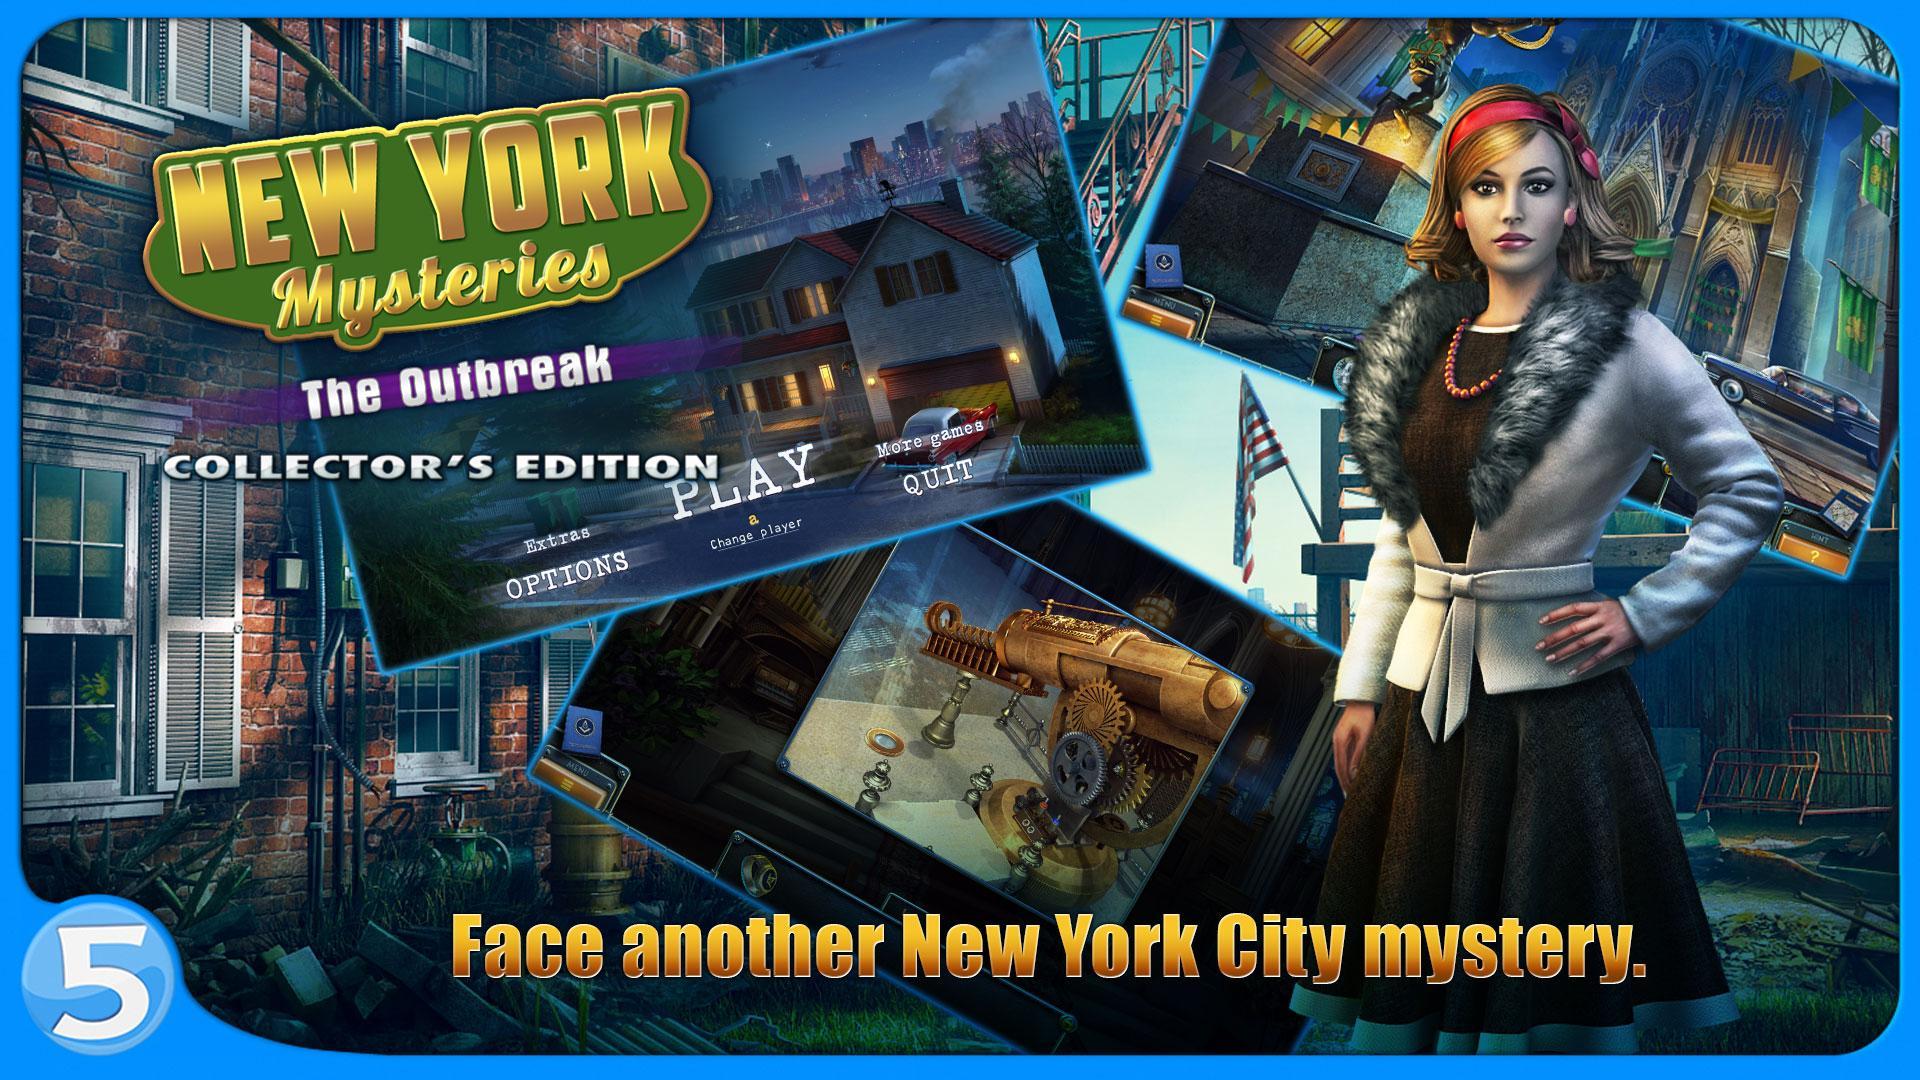 New York Mysteries: The Outbreak (free to play) 2.0.1.923.49 Screenshot 11